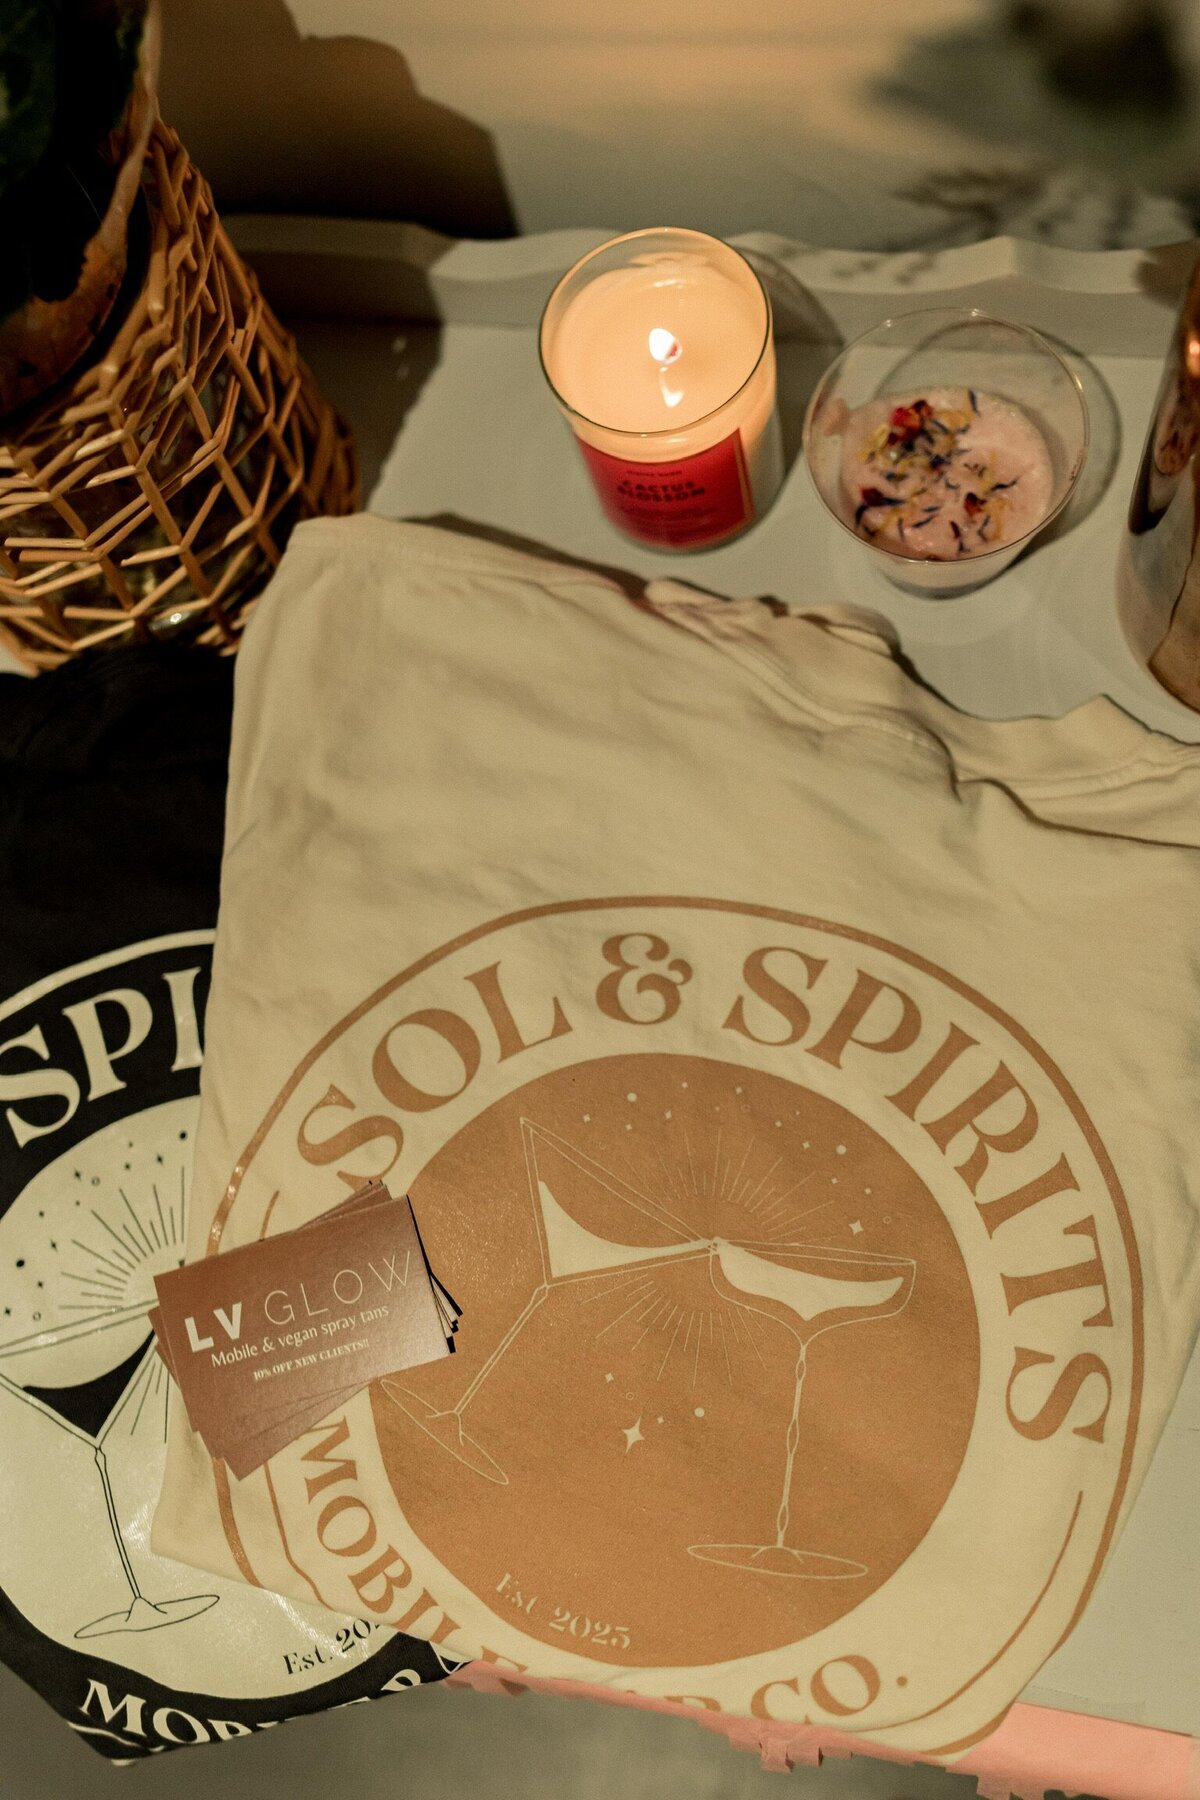 Sol & Spirits tee shirt with logo on it